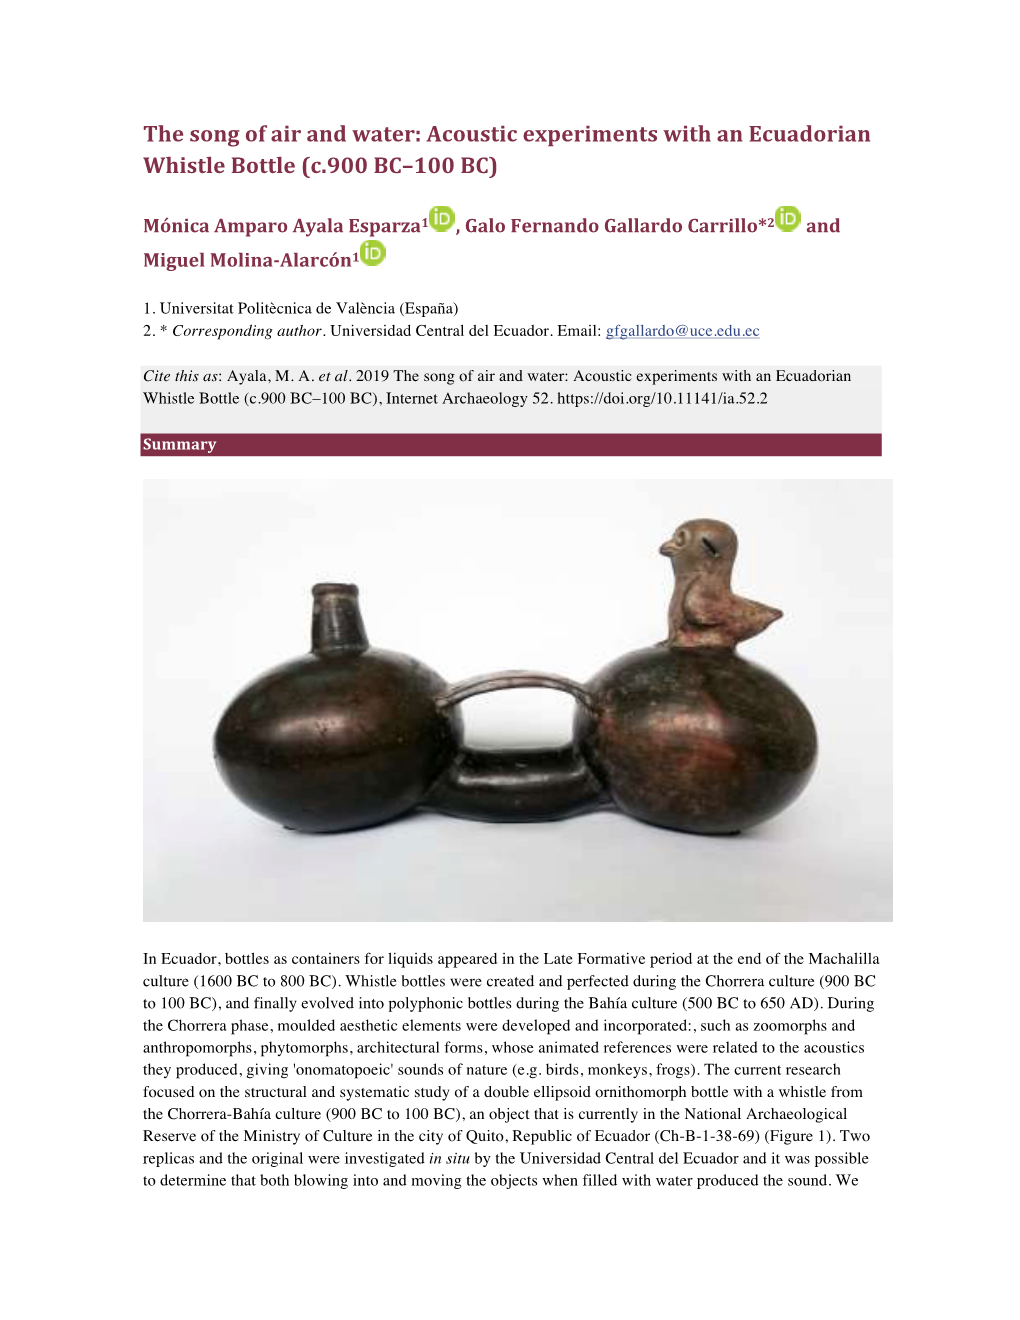 Acoustic Experiments with an Ecuadorian Whistle Bottle (C.900 BC–100 BC)